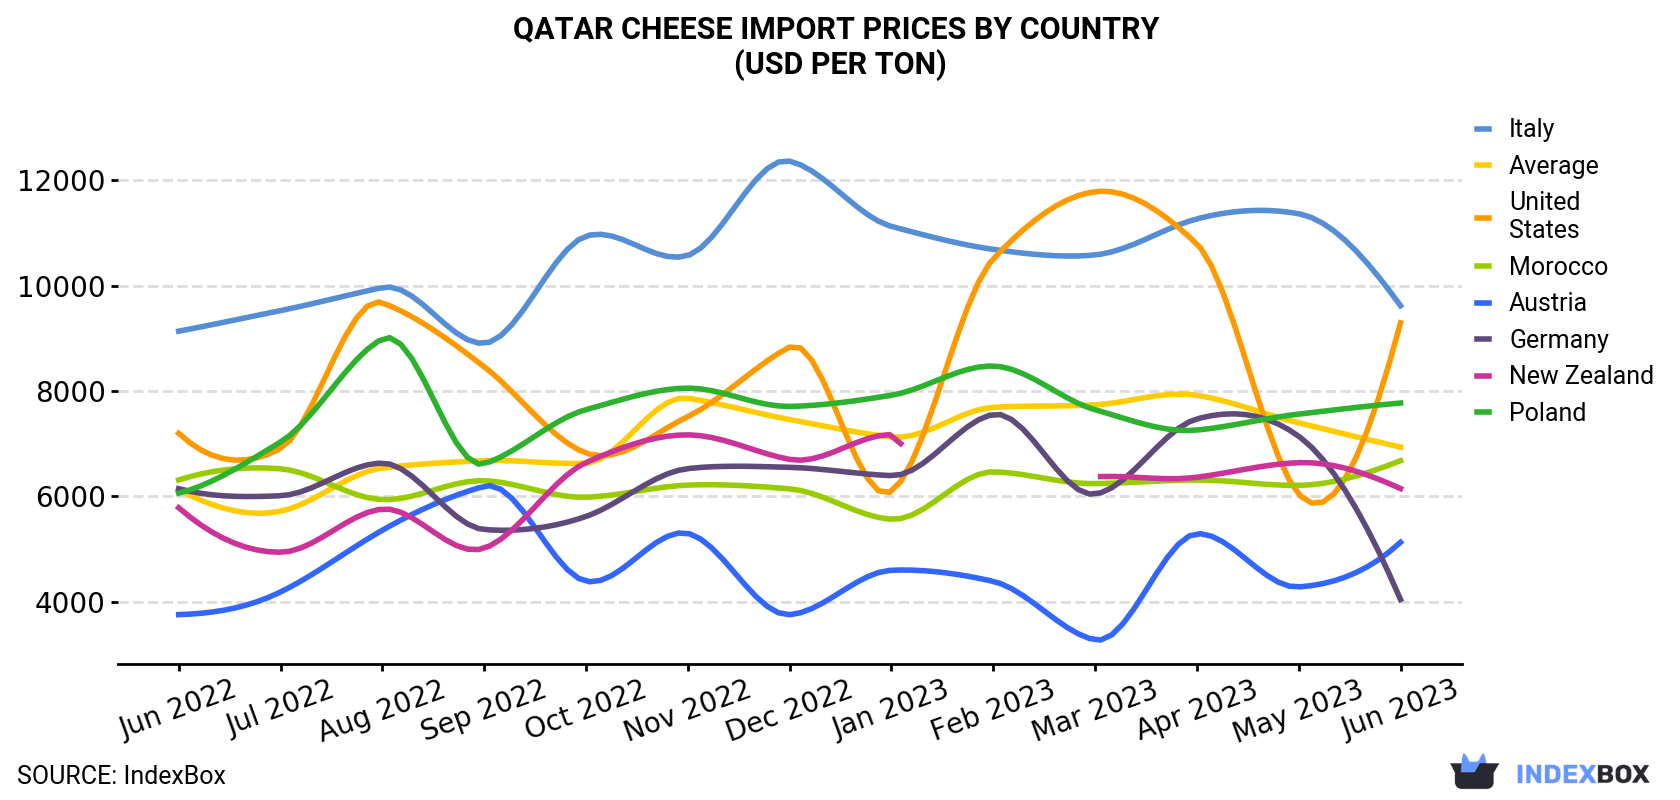 Qatar Cheese Import Prices By Country (USD Per Ton)